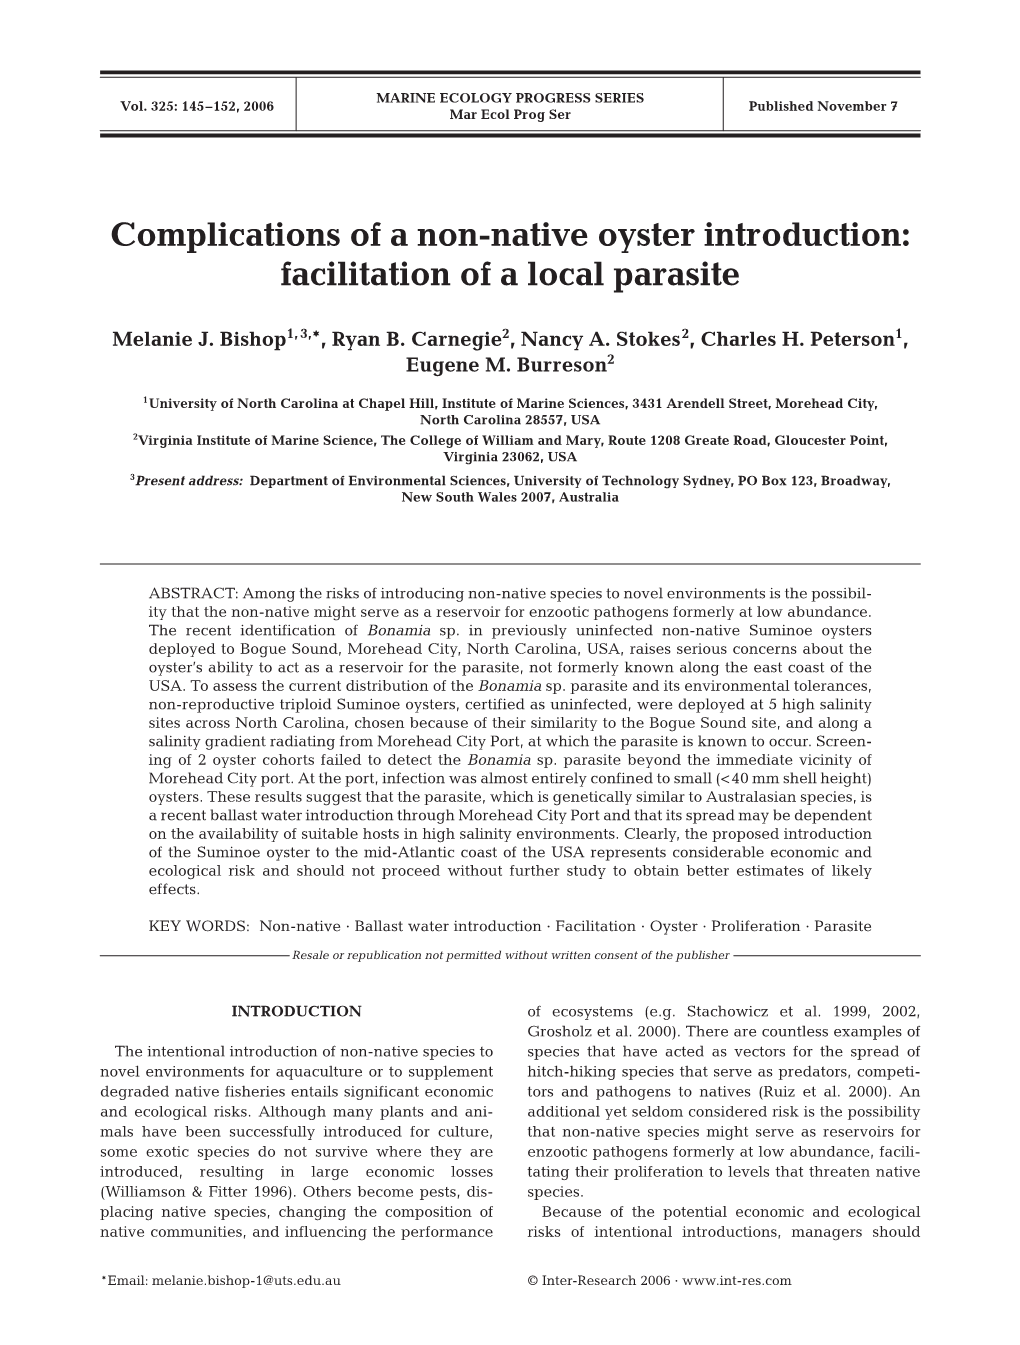 Complications of a Non-Native Oyster Introduction: Facilitation of a Local Parasite